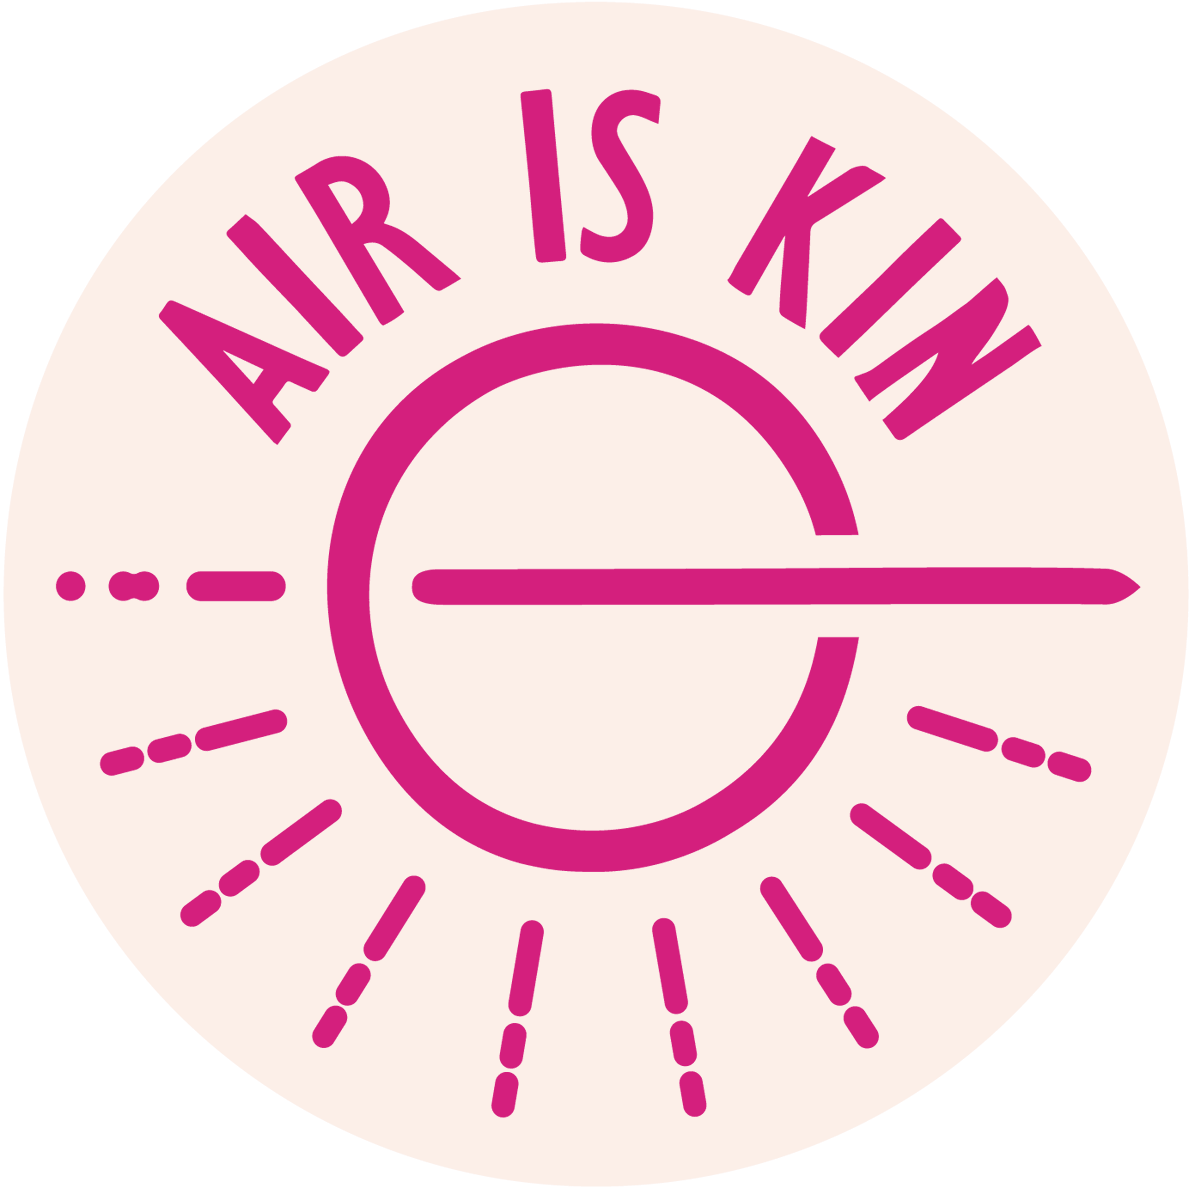 We have launched our first seroepidemiological study on Air Pollution. Study will focus on the first contact symptoms and lived experience of air pollution. Industrial polluters are directly PROFITING off of SICKNESS/DEATHS We are also including a peer-to-peer program.